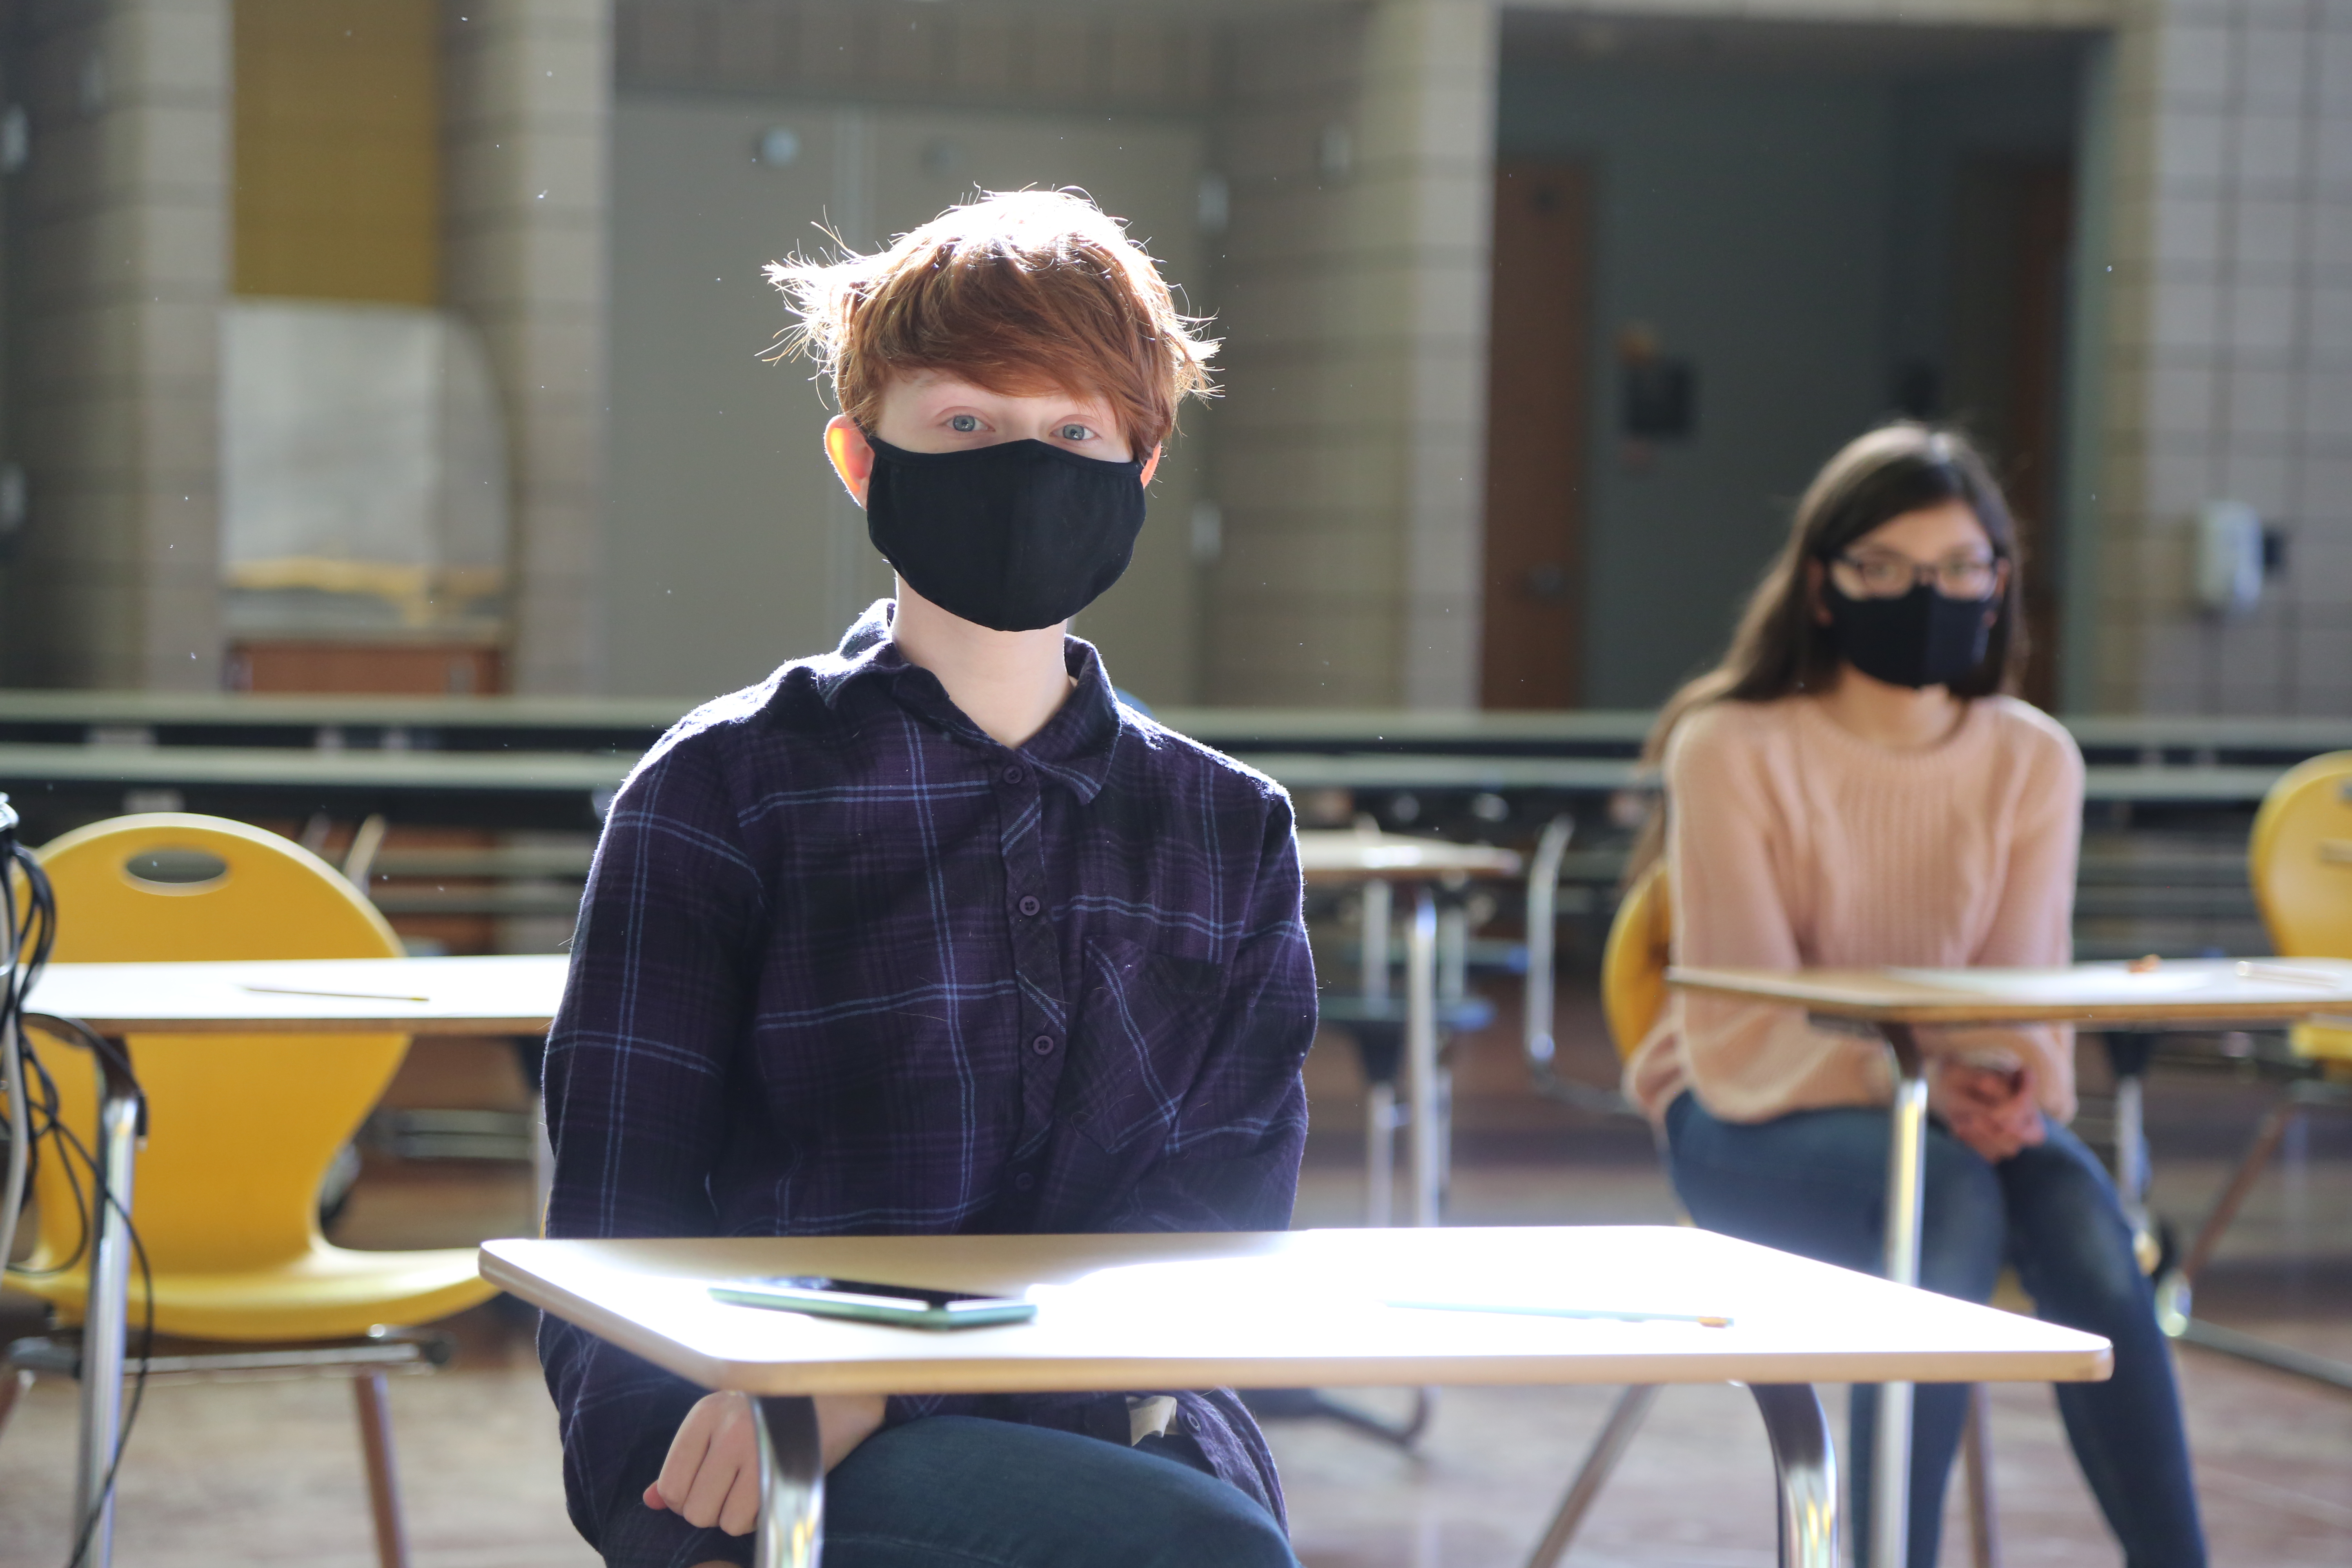 A student wearing a mask sitting at a classroom desk.